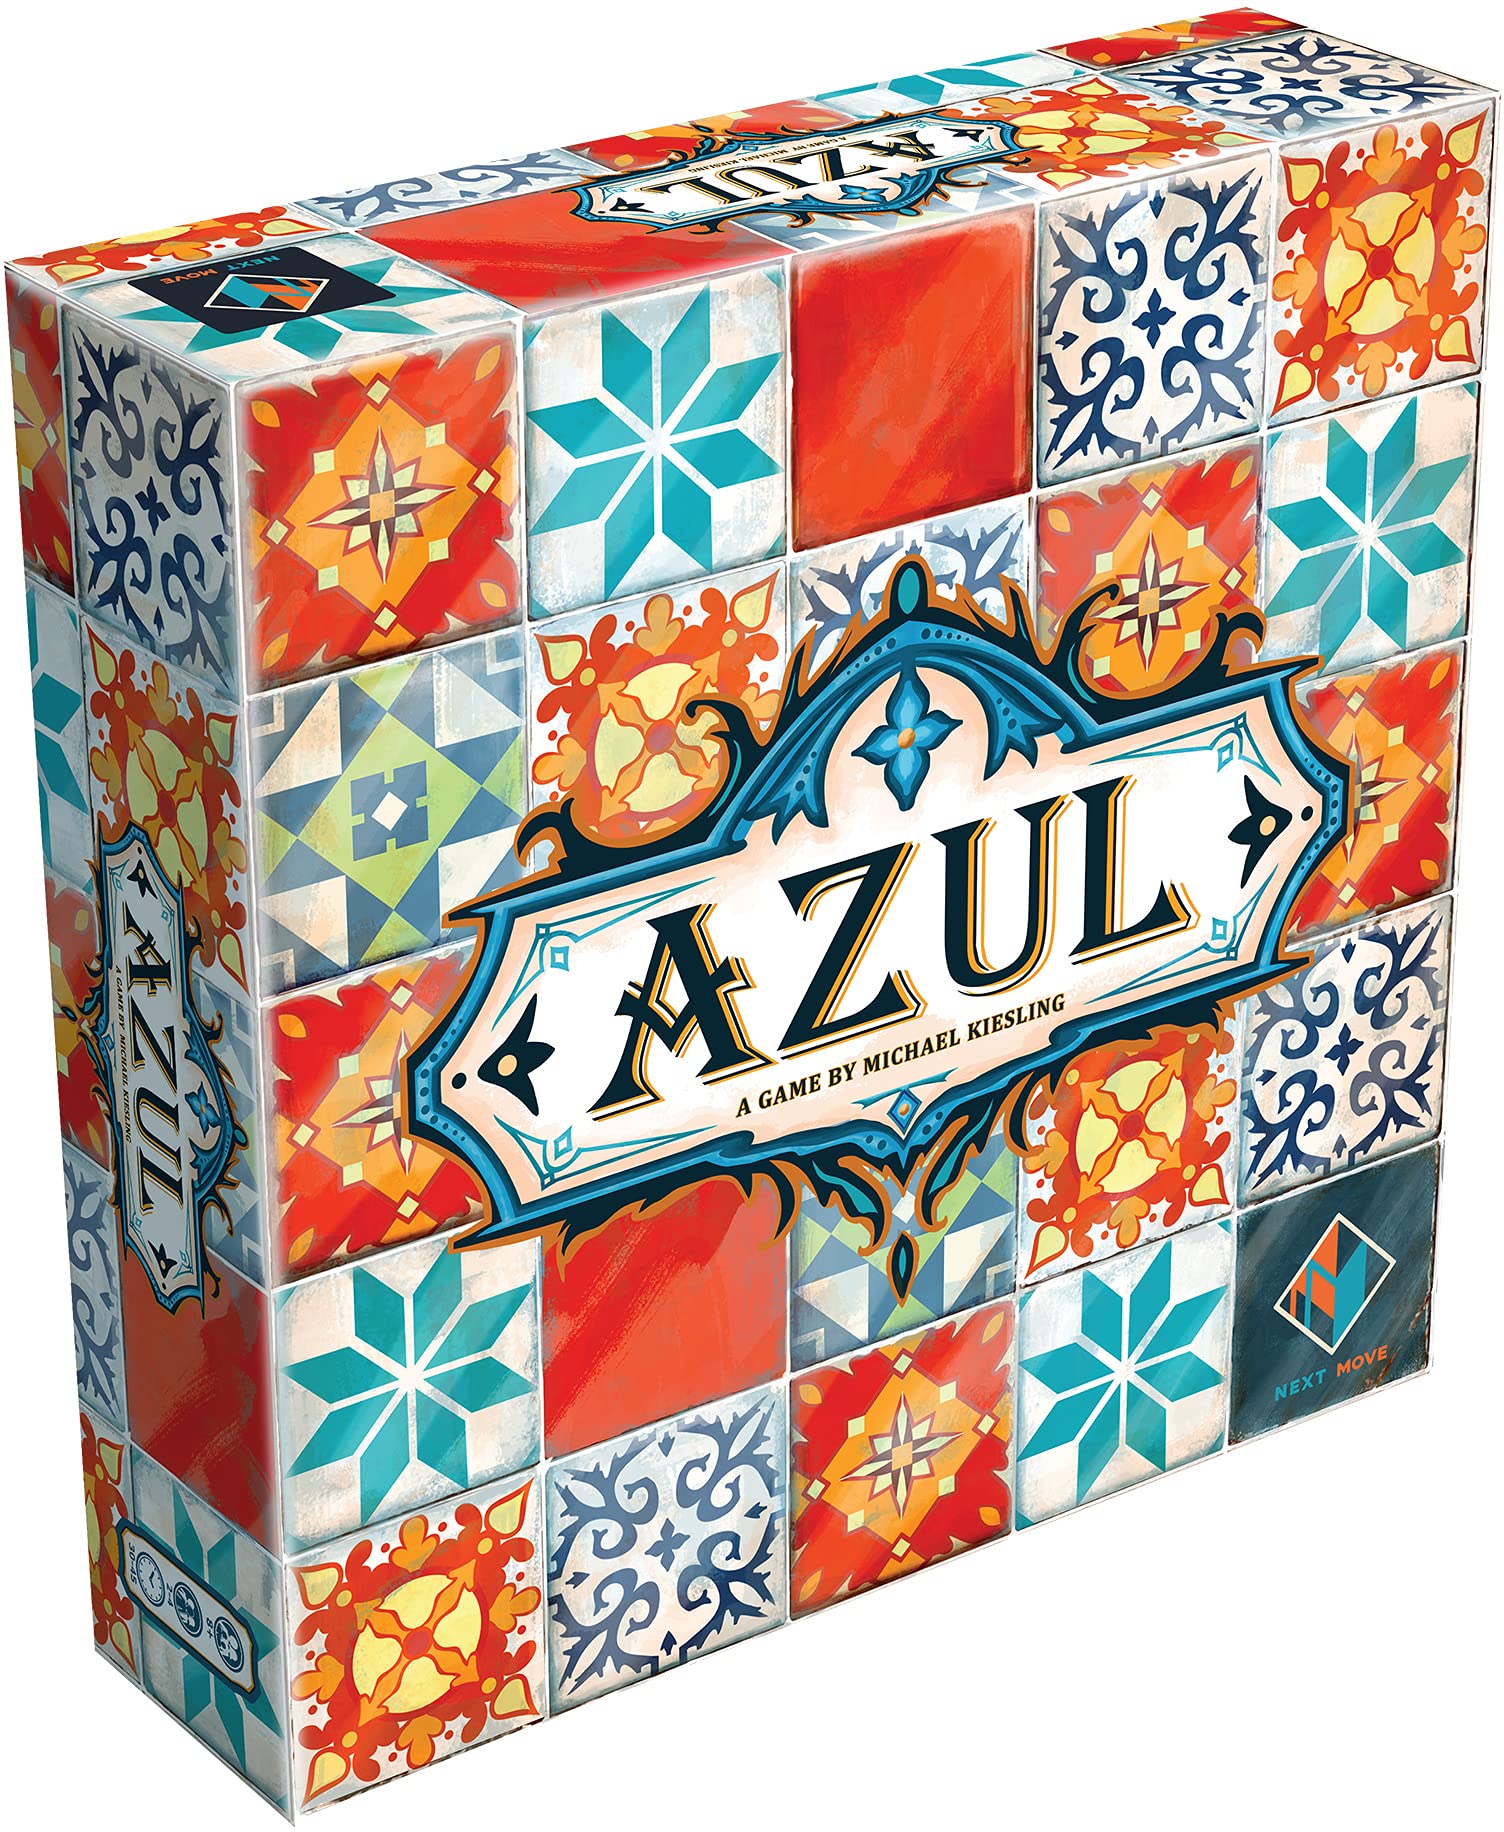 Azul Board Game | Strategy Board Game | Mosaic Tile Placement Game | Family Board Game for Adults and Kids | Ages 8 and up | 2 to 4 Players | Average Playtime 30 - 45 Minutes | Made by Next Move Games